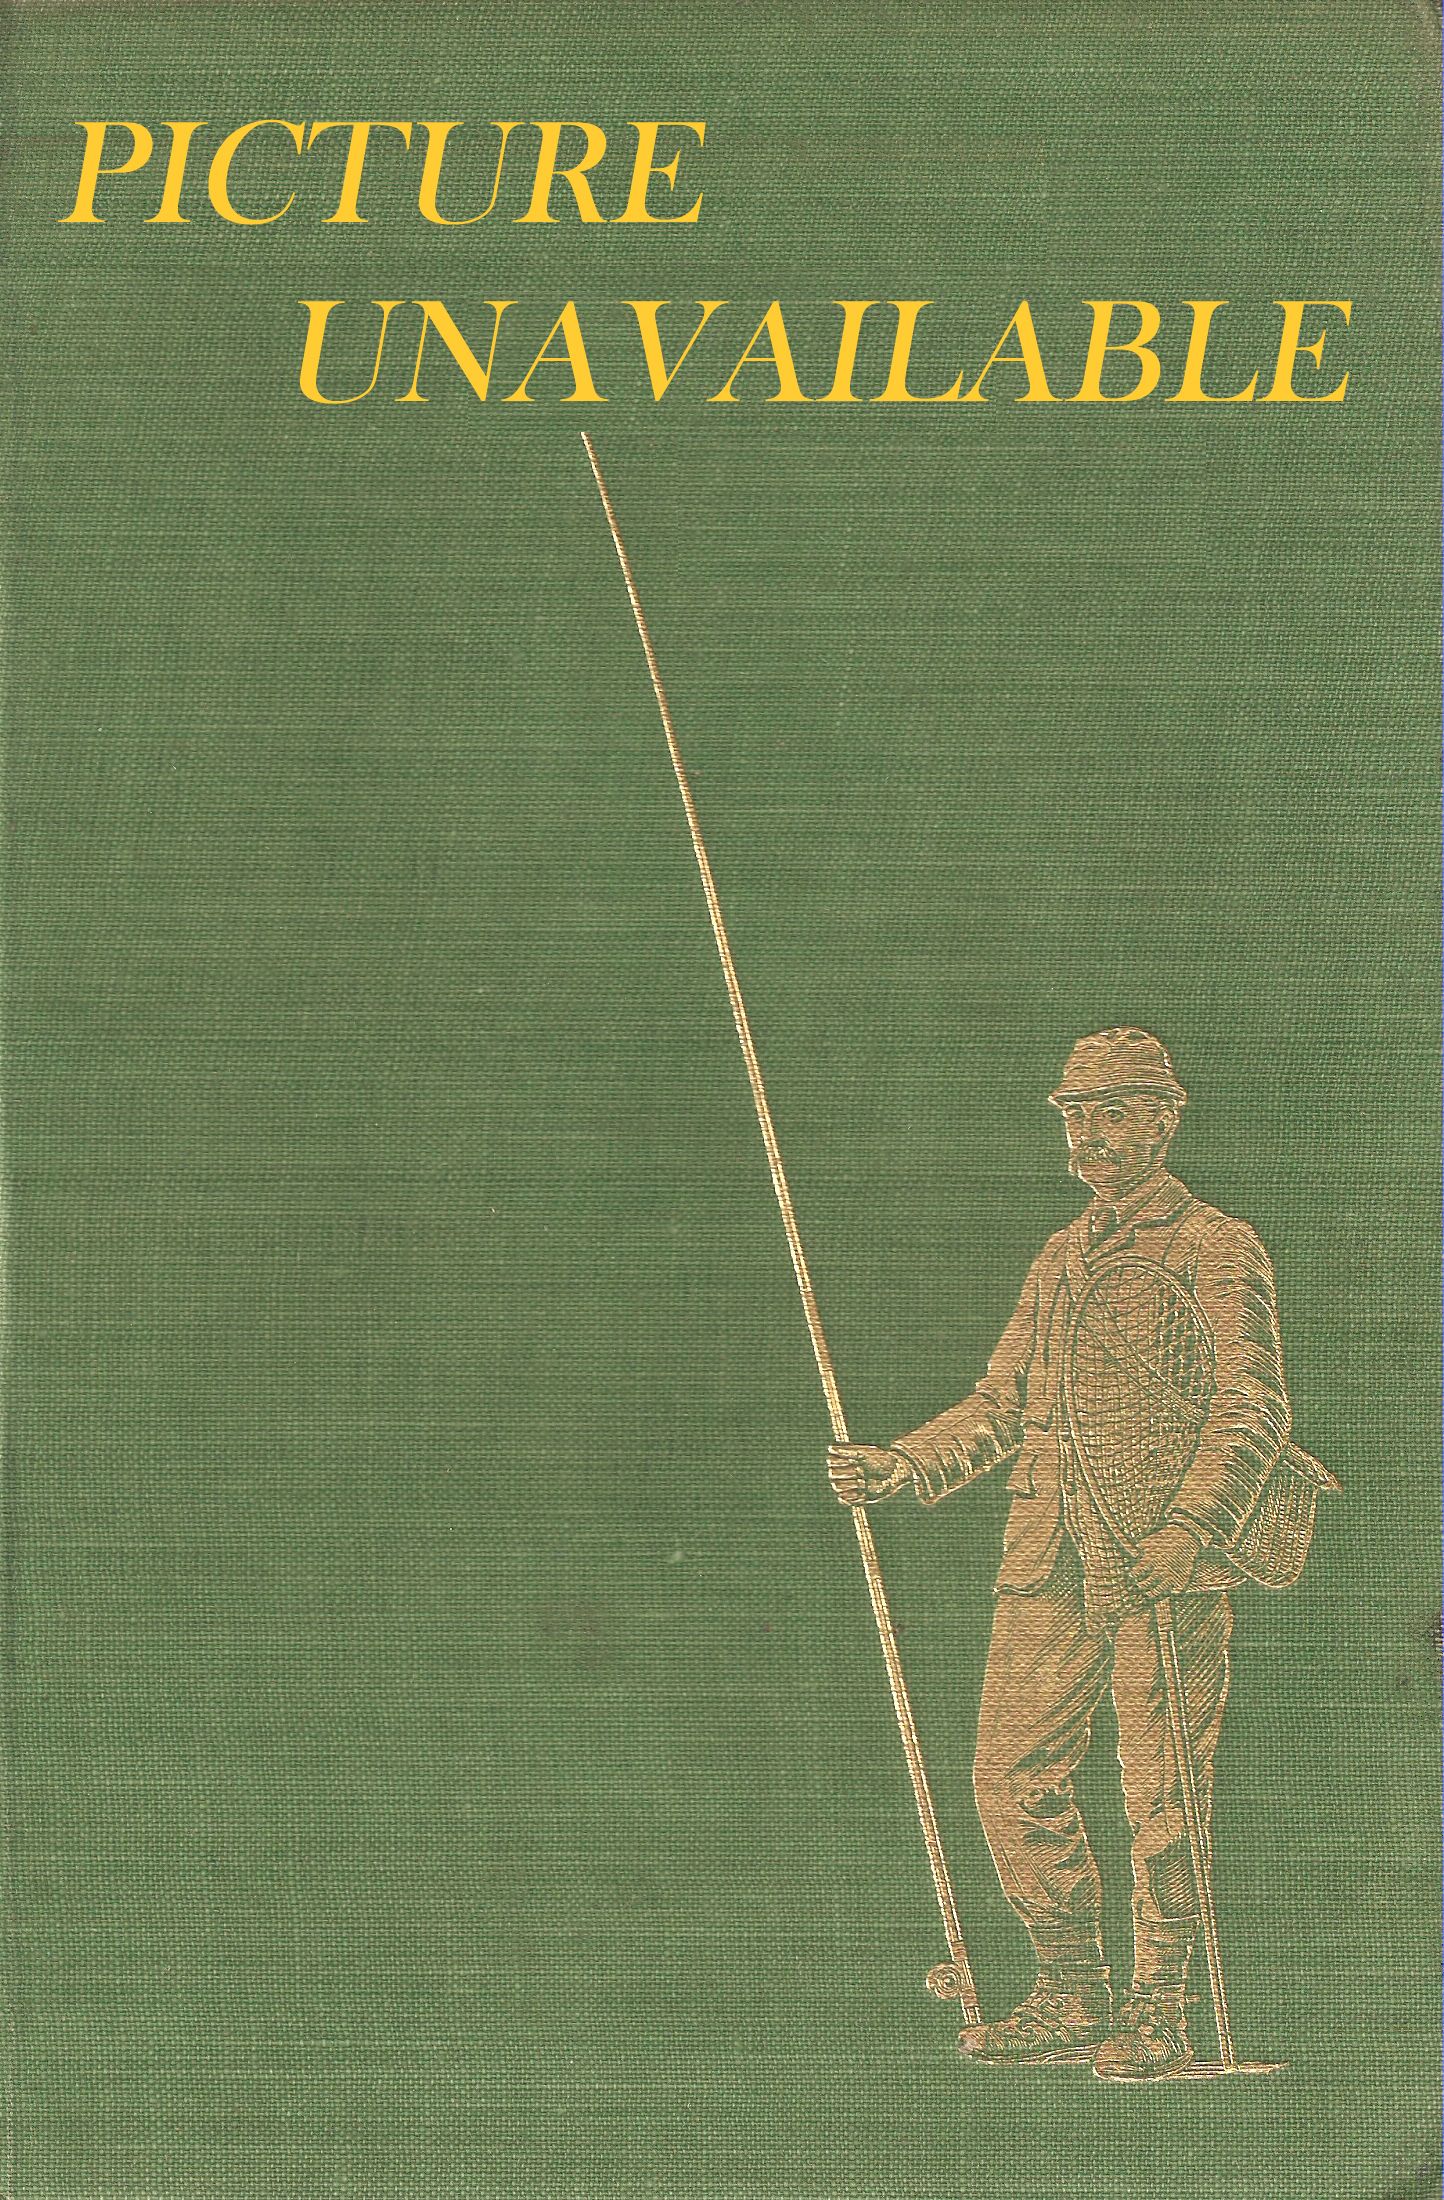 CASTING AT THE SUN: THE REFLECTIONS OF A CARP FISHER. By Christopher  Yates. First edition.